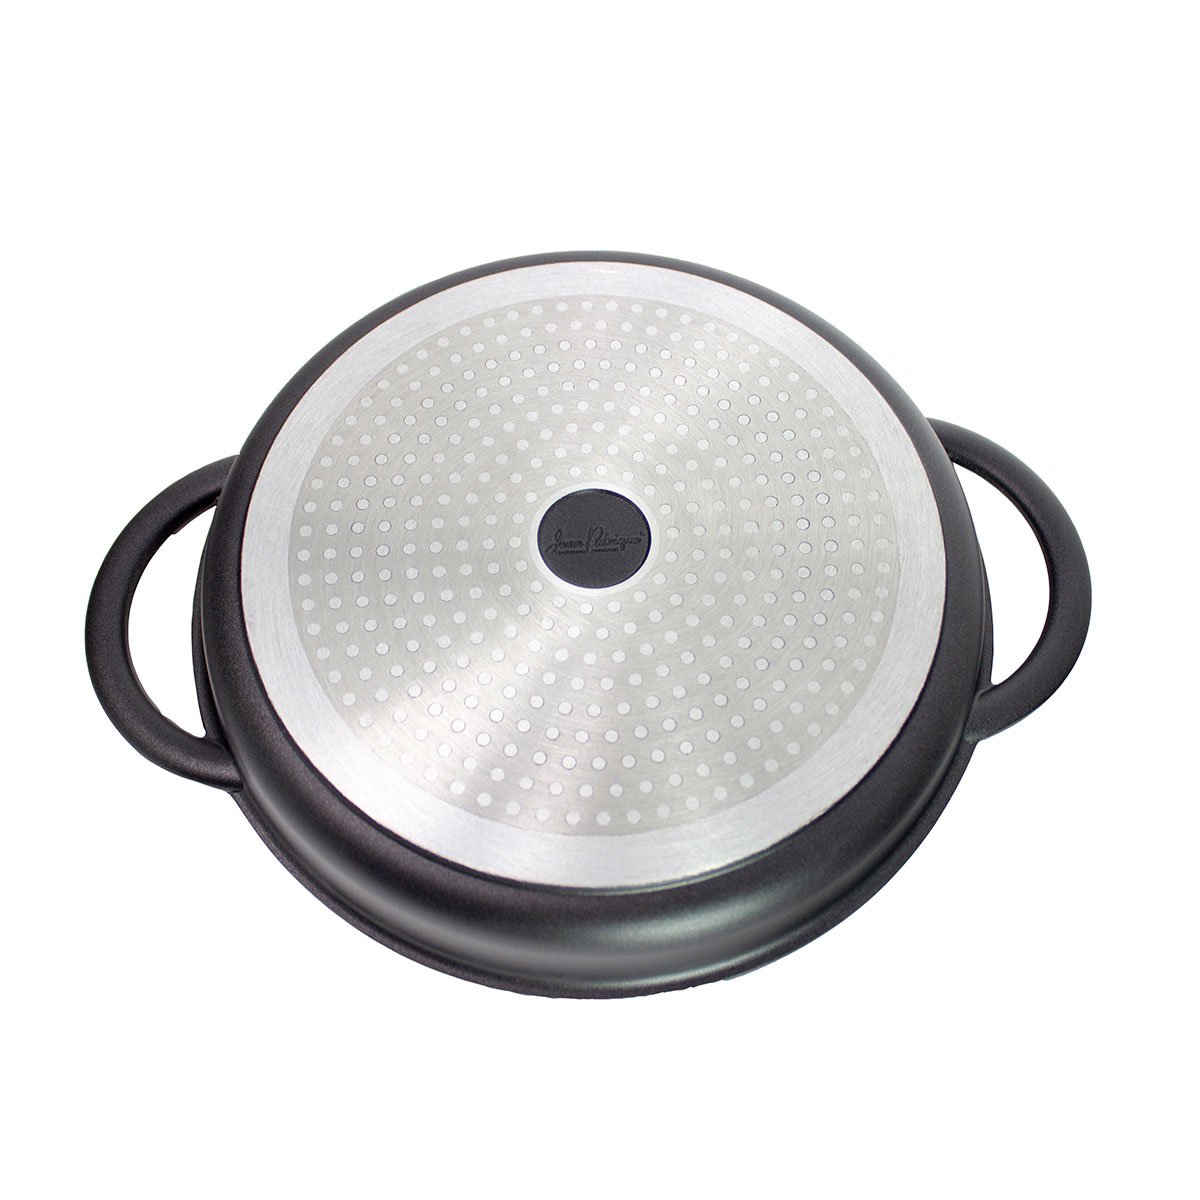 Jean Patrique Professional Cookware - Hi everyone! I am the Whatever Pan.  (Not to be confused with my distant cousin Peter) Welcome to my Instagram  Page. I am here to make food